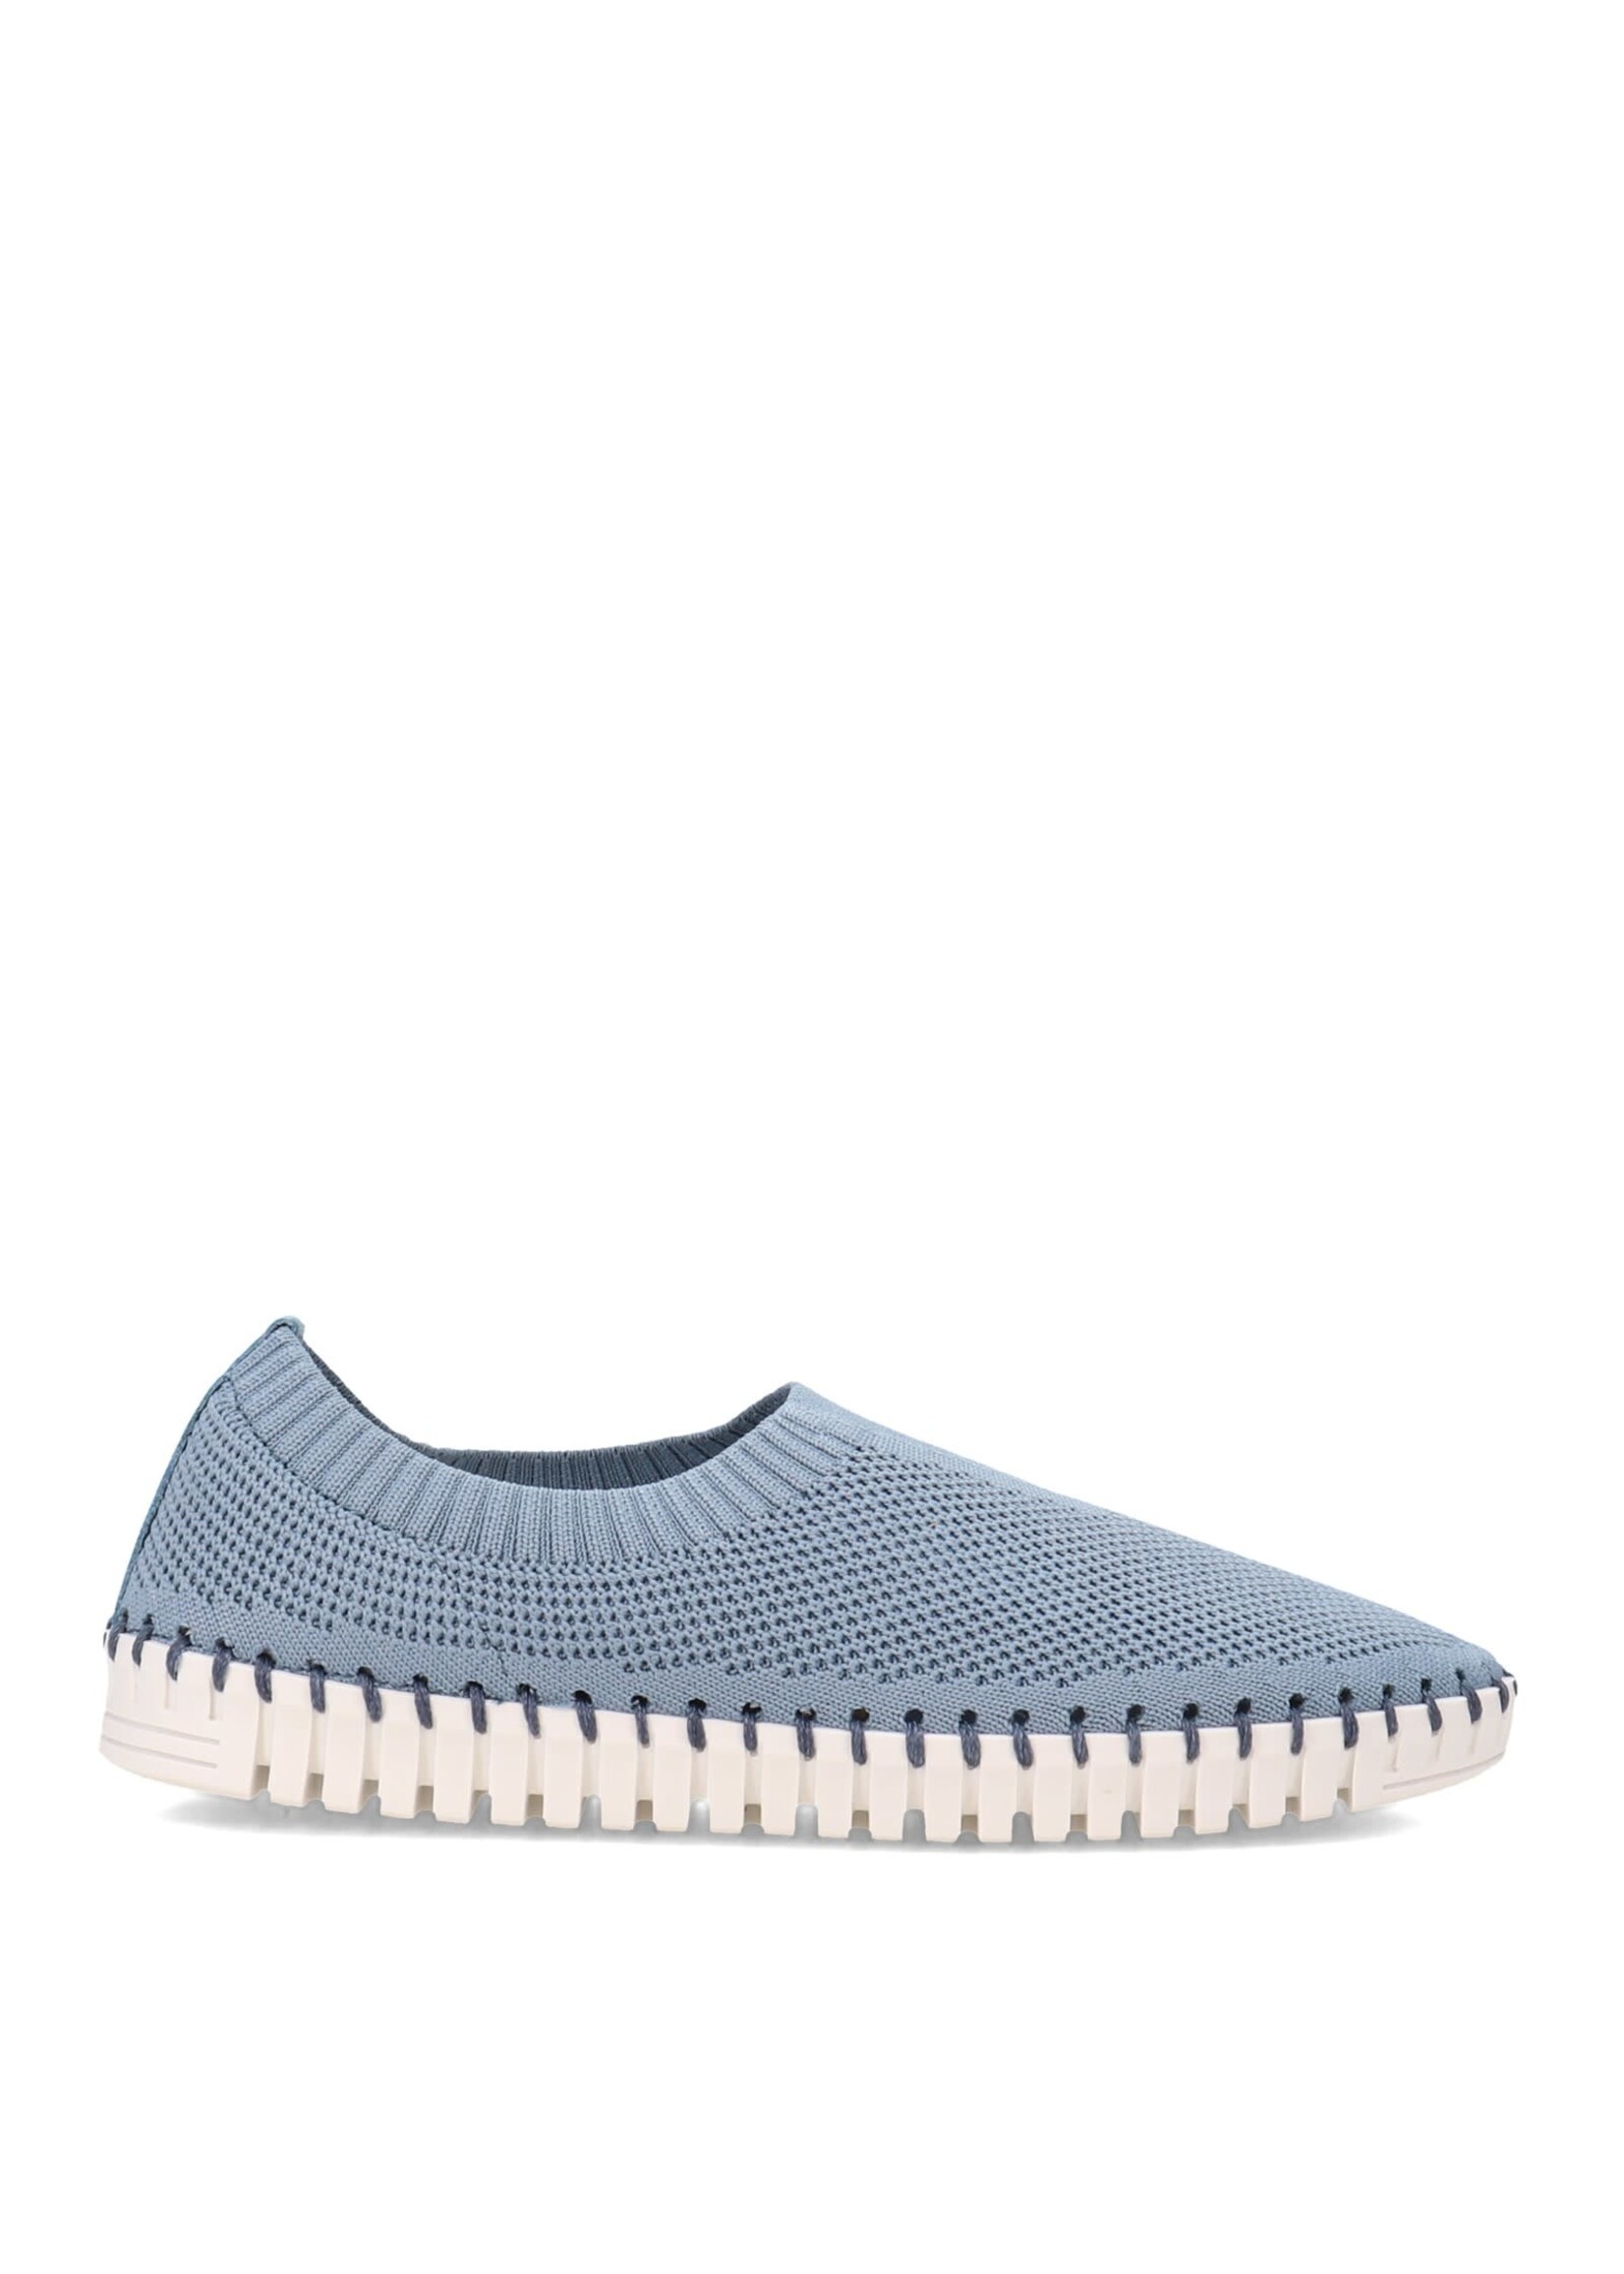 Eric Michael Lucy Powder Blue Slip Ons by Eric Michaels